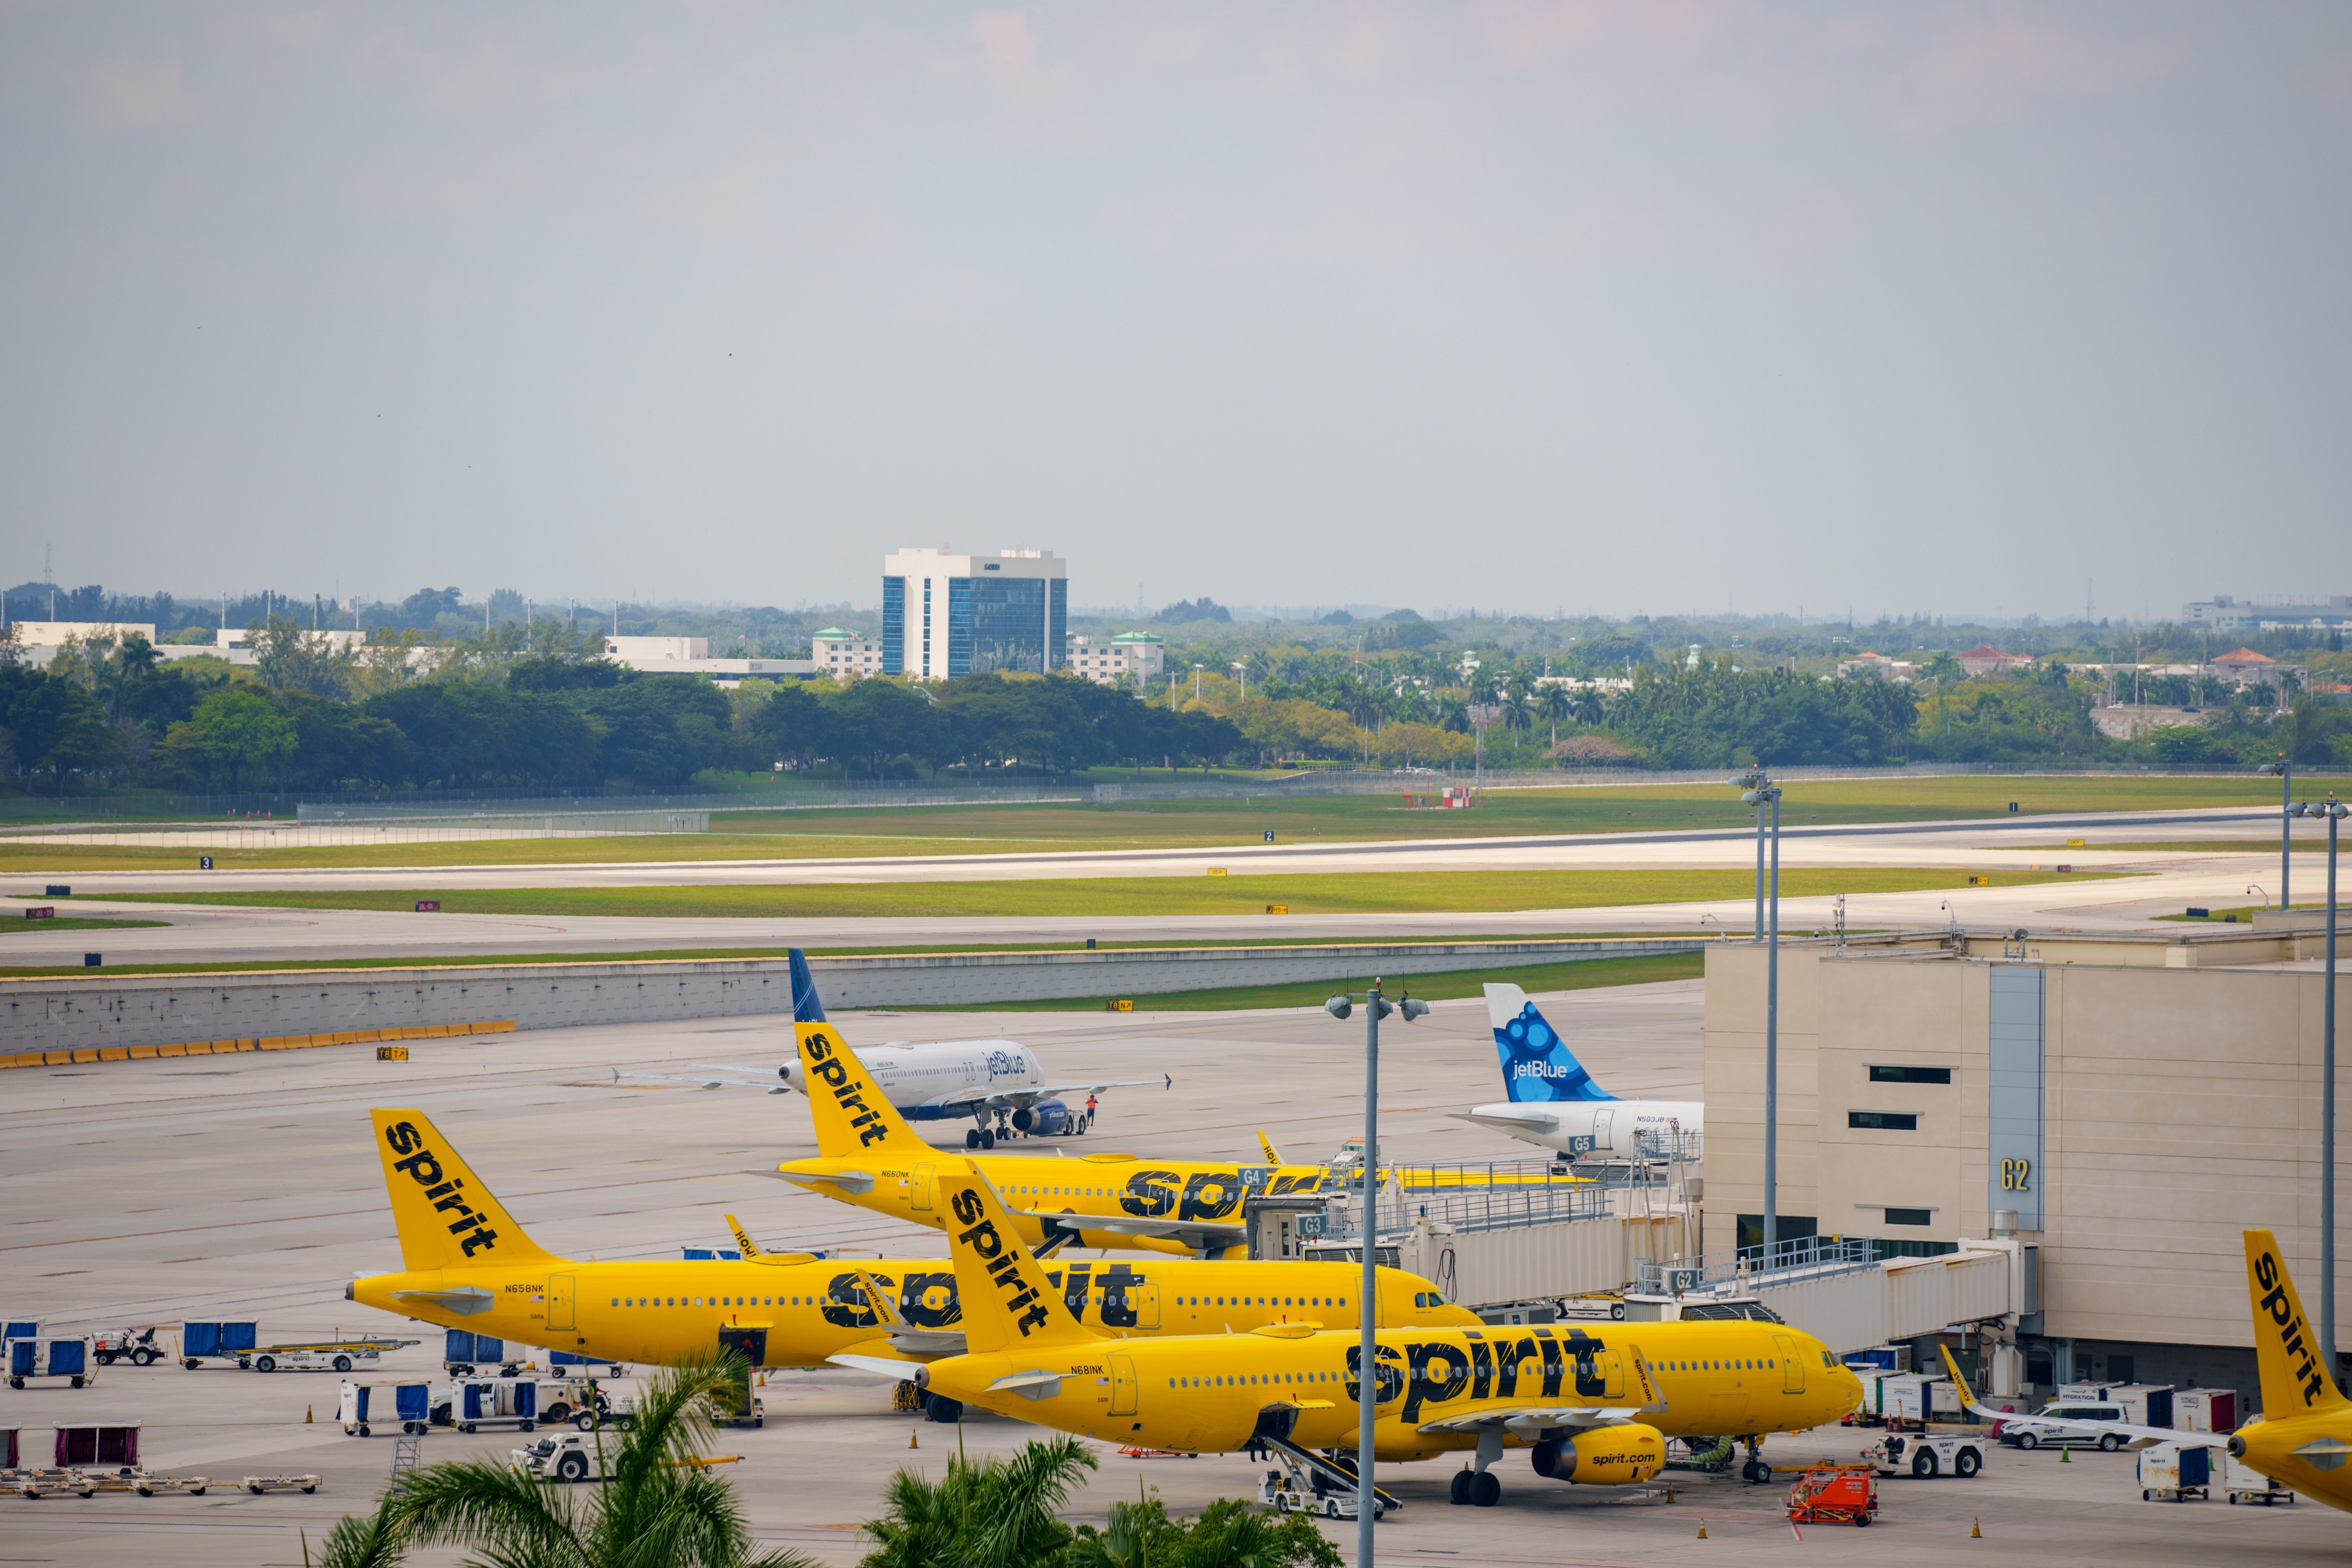 A view of several Spirit aircraft parked in Fort Lauderdale 